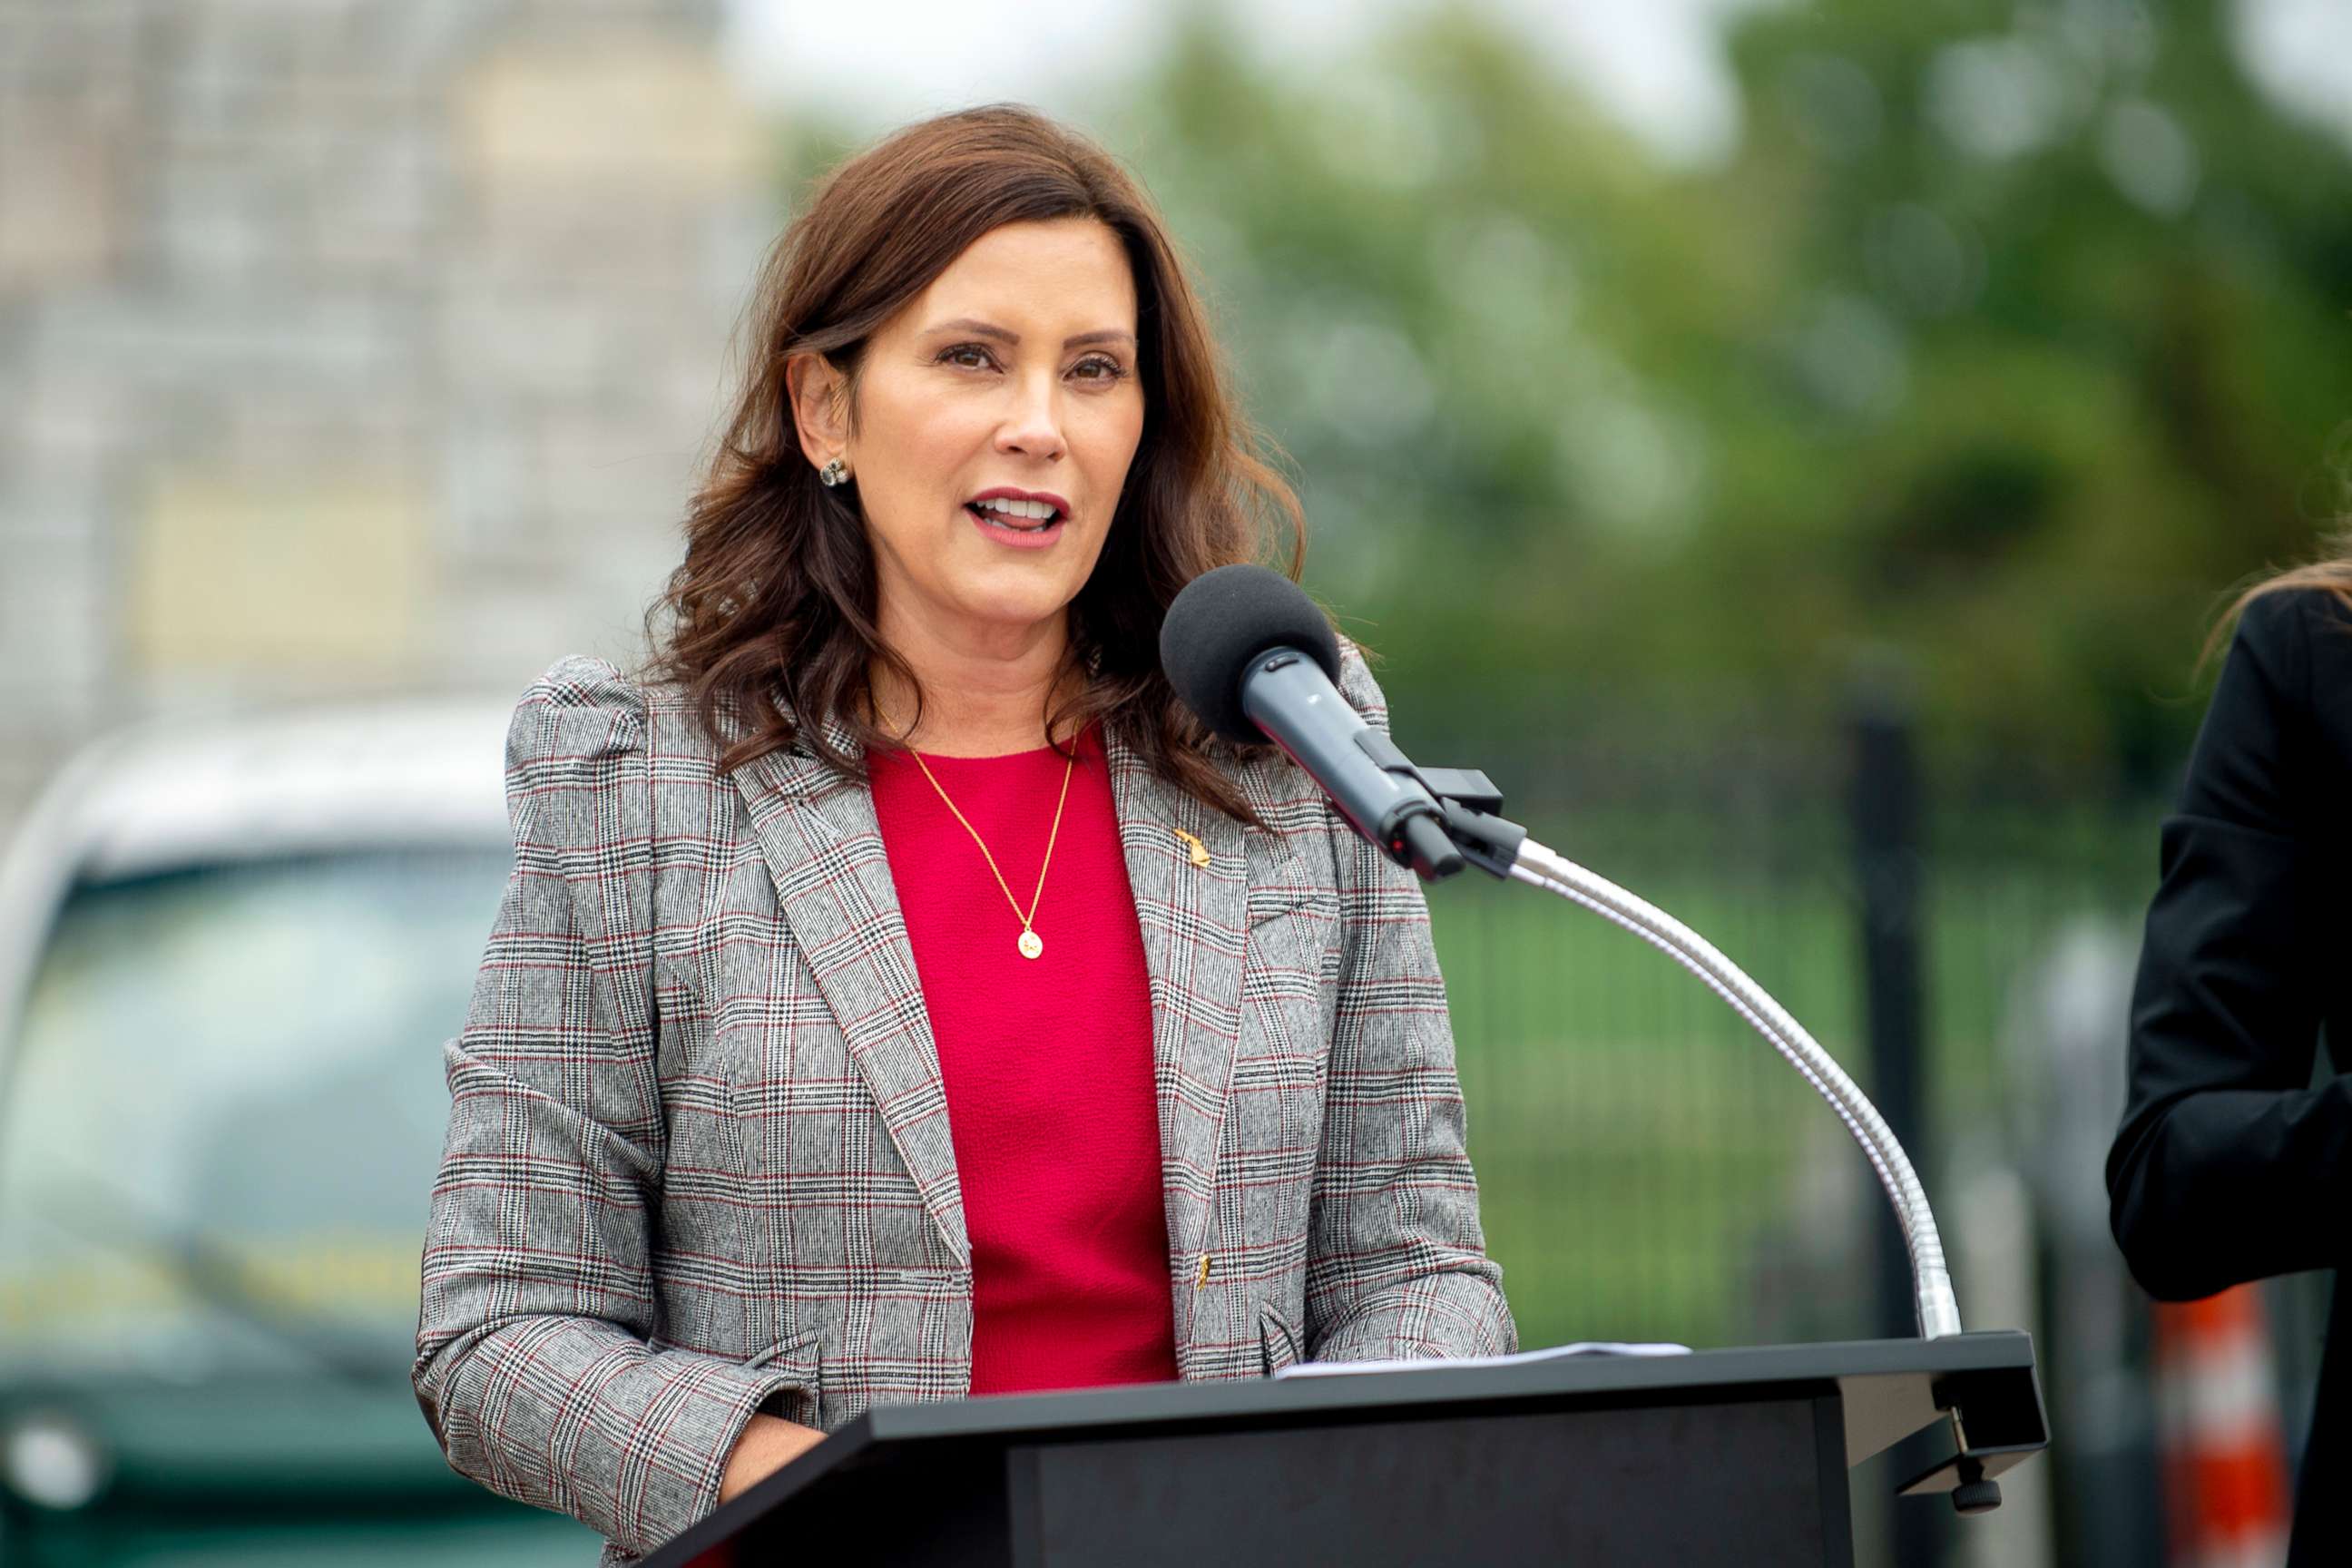 PHOTO: In this Sept. 15, 2021 file photo Michigan Gov. Gretchen Whitmer speaks at Kettering University in Flint, Mich.